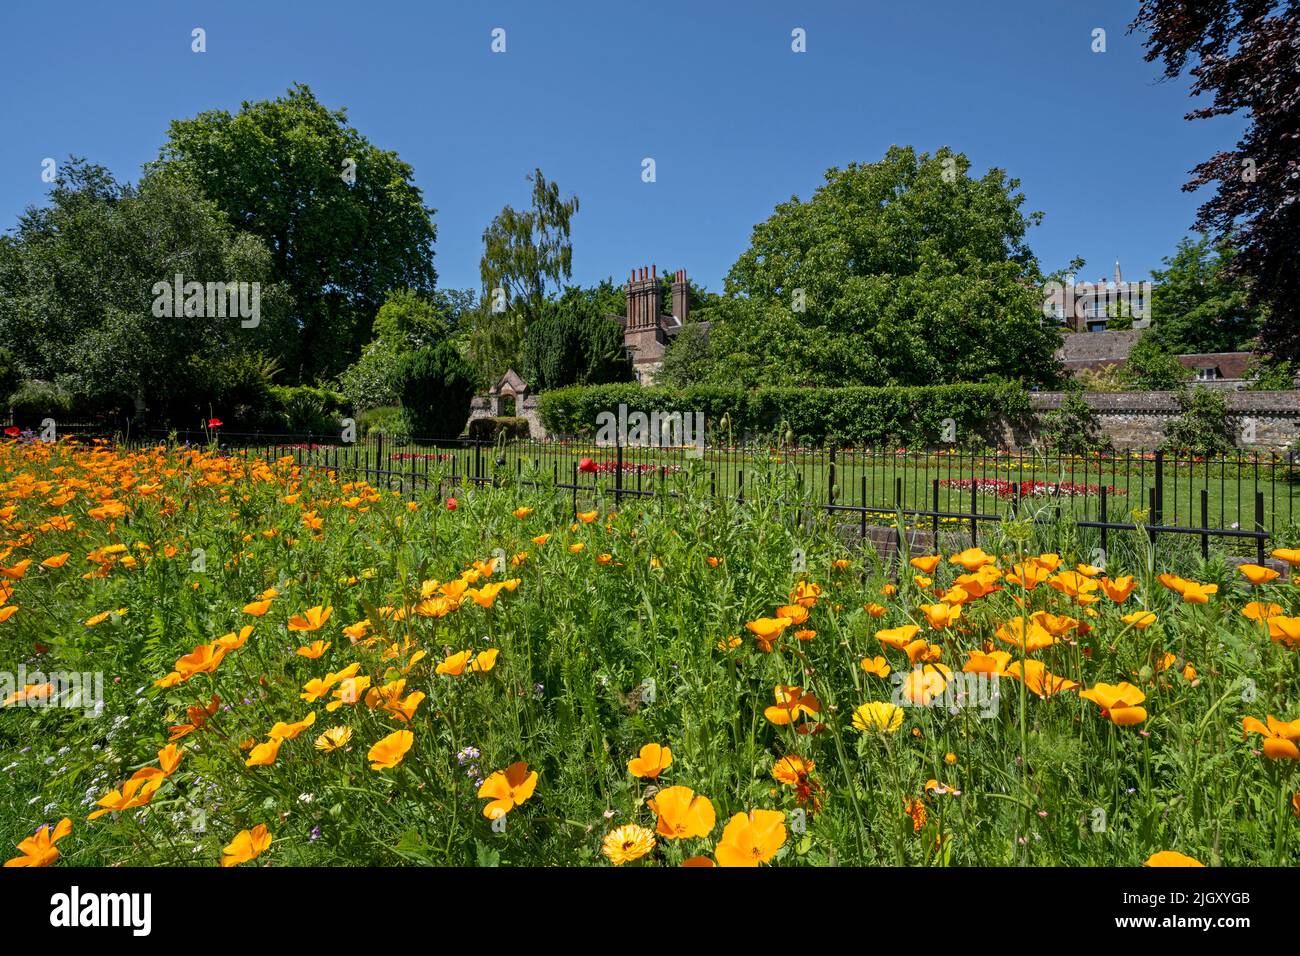 The Flower Gardens and Manor at Southover Grange, Lewes, East Sussex, Regno Unito Foto Stock